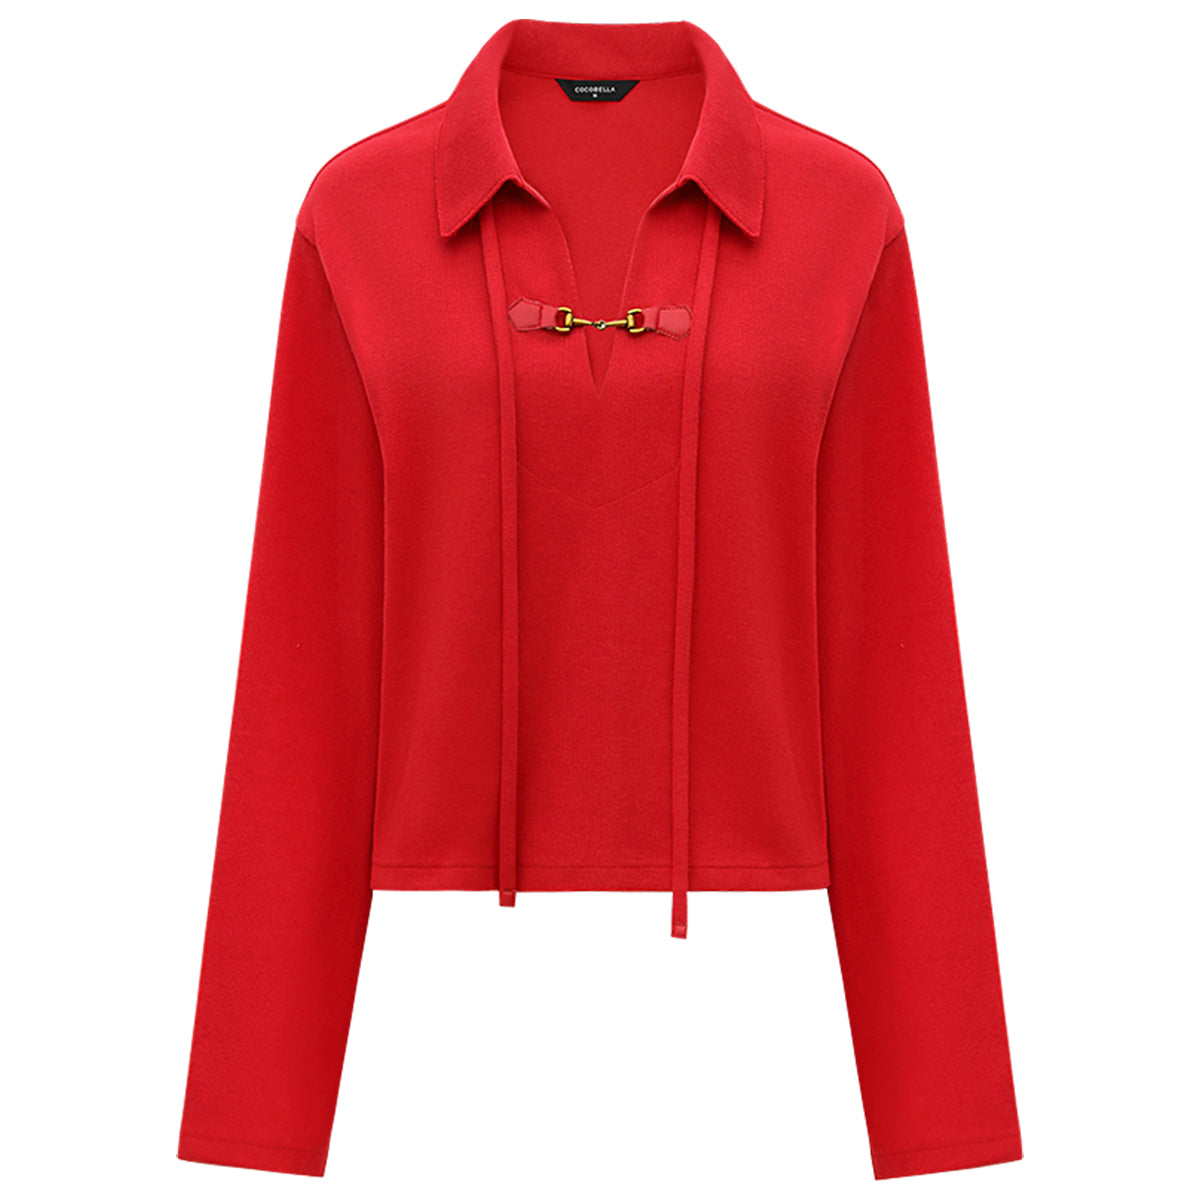 comfy-drawstring-wide-sleeved-red-sweater-with-collar-buckle_all_red_4.jpg